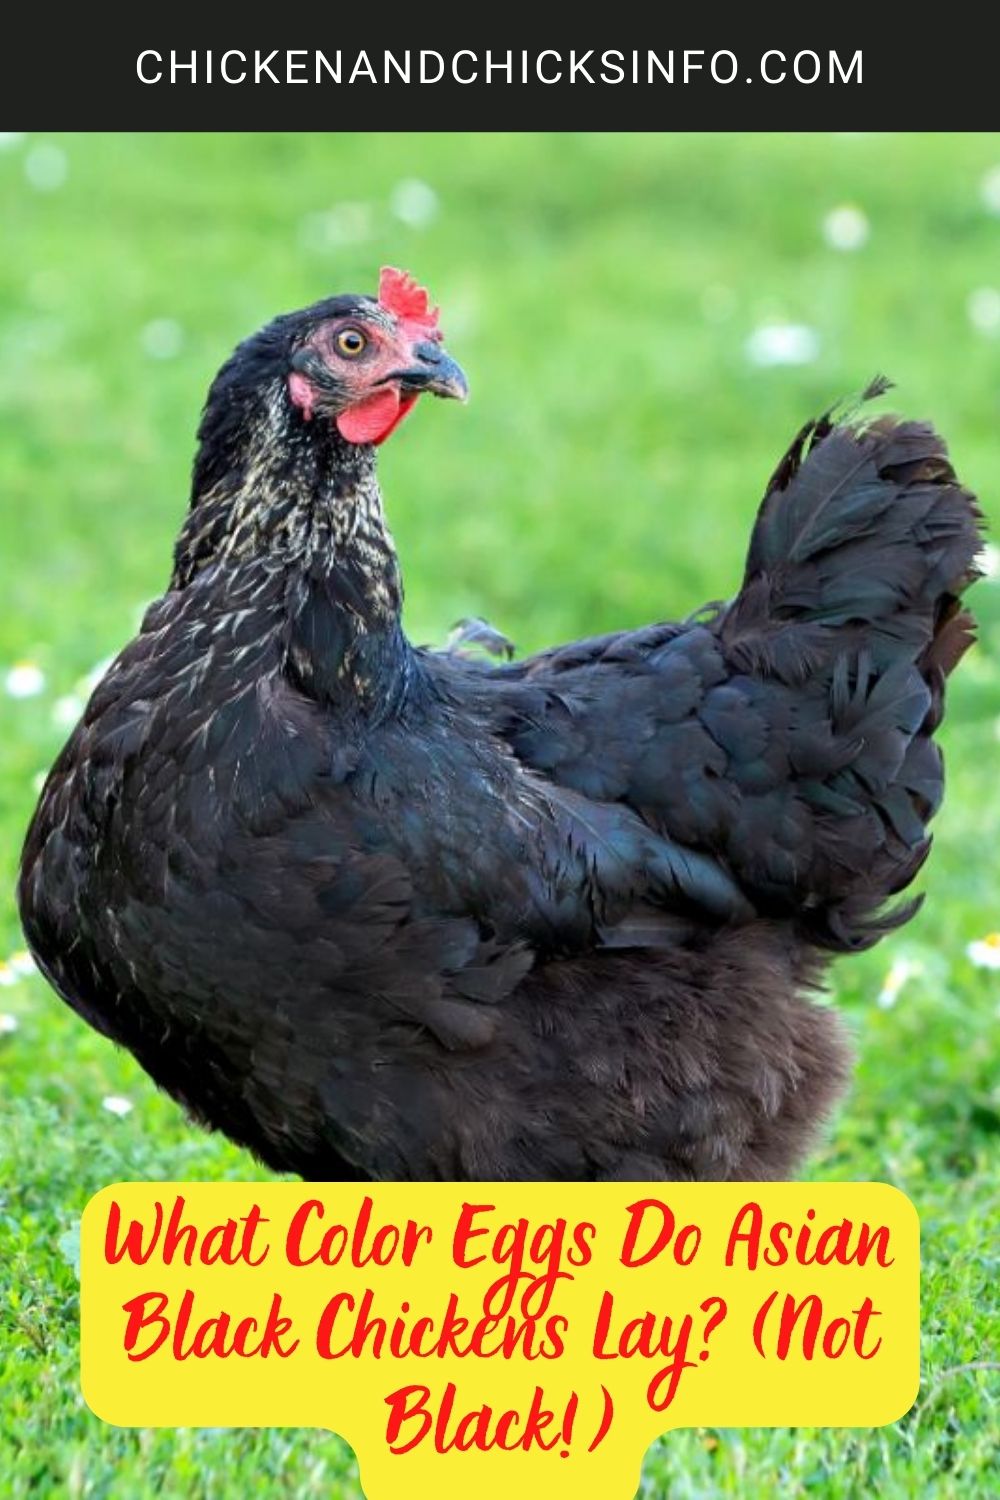 What Color Eggs Do Asian Black Chickens Lay? (Not Black!) poster.
